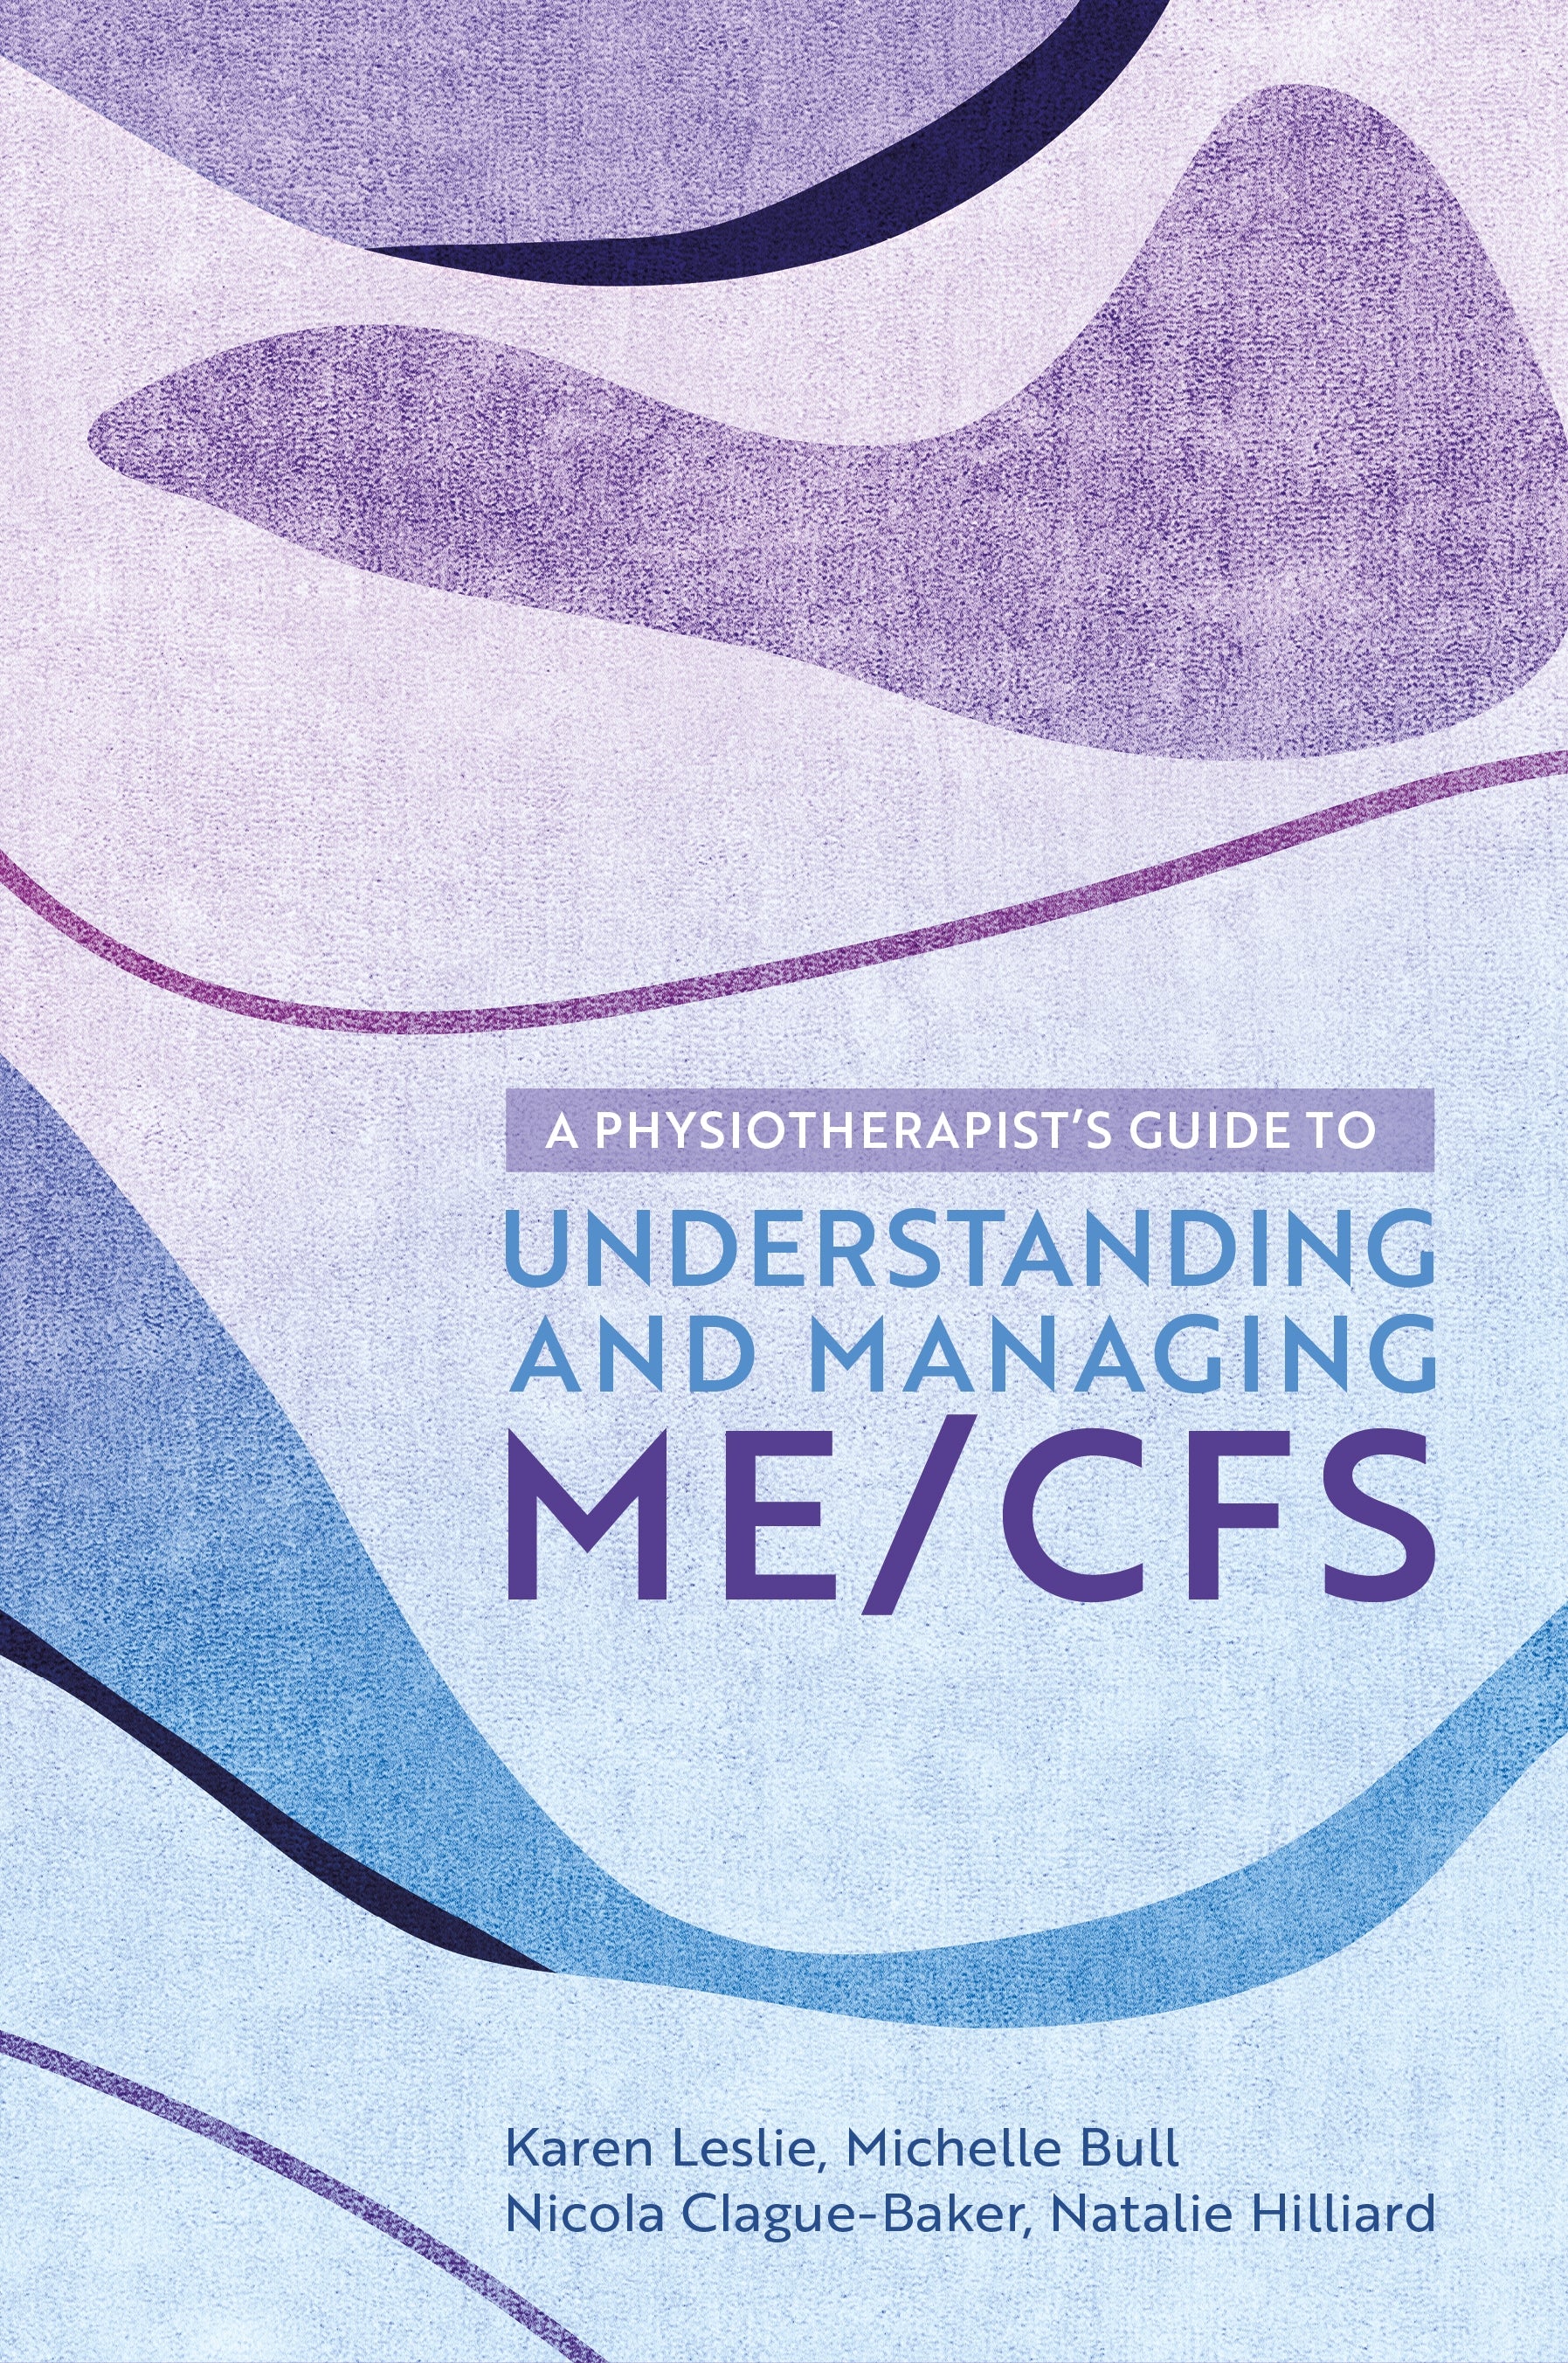 A Physiotherapist's Guide to Understanding and Managing ME/CFS by Karen Leslie, Nicola Clague-Baker, Natalie Hilliard, Michelle Bull